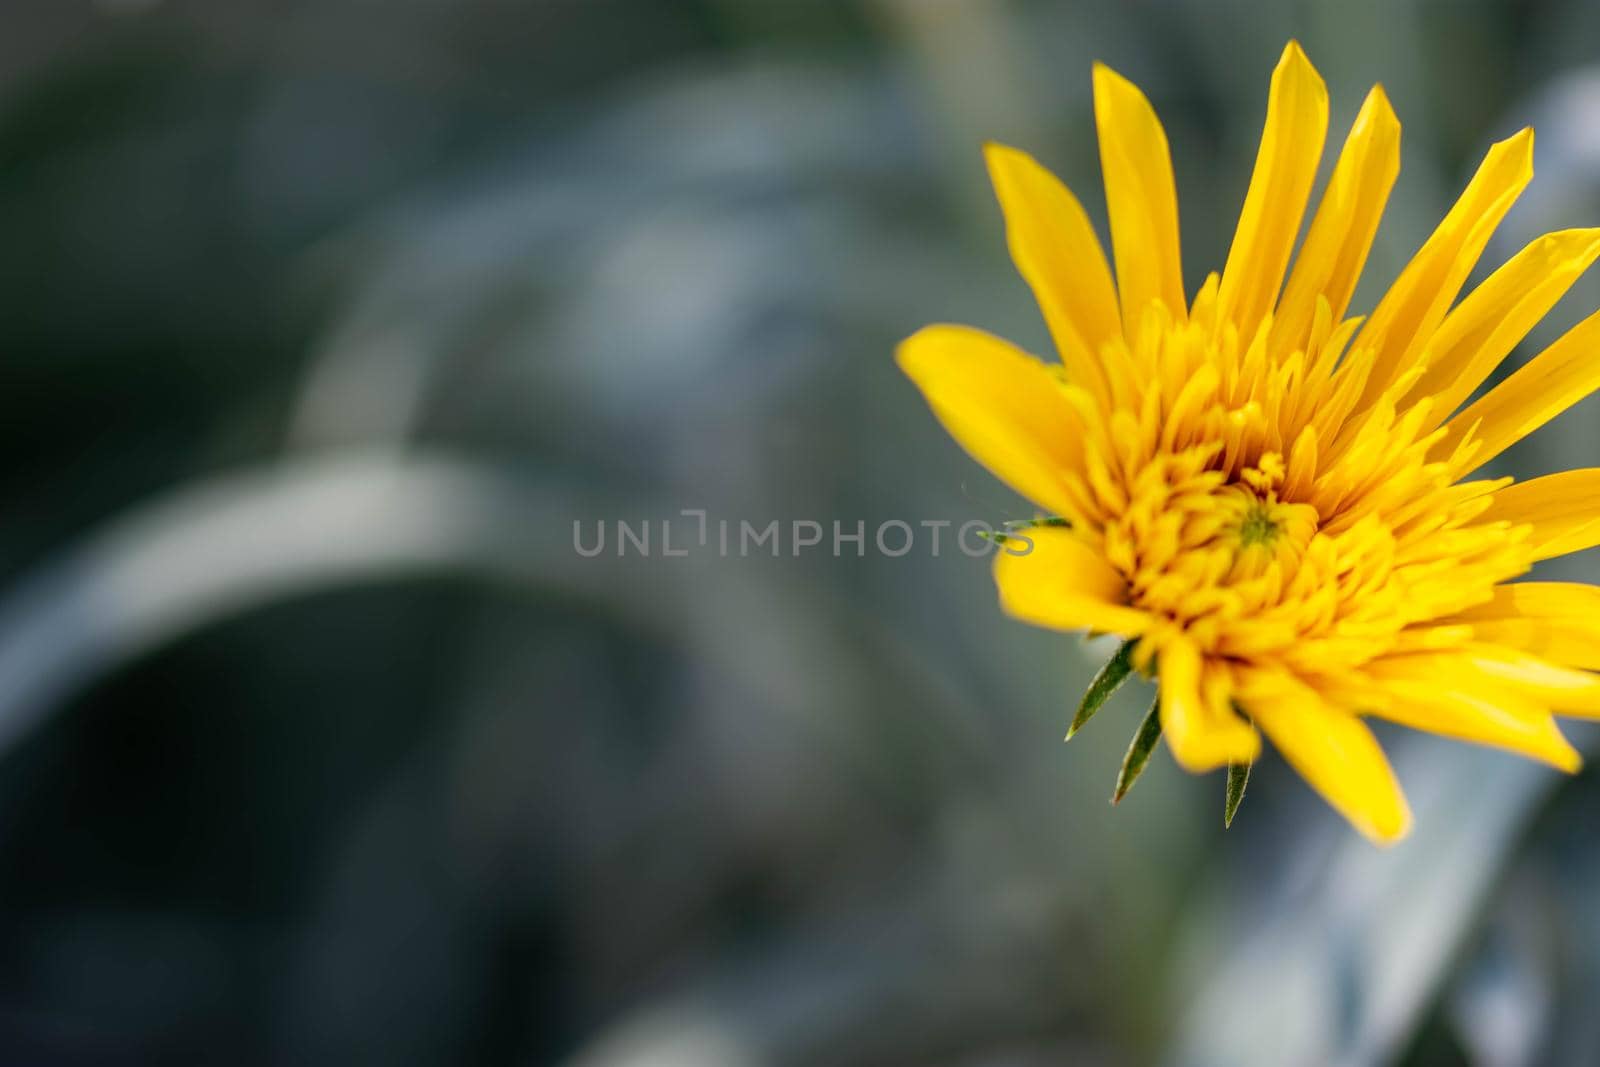 Horizontal full lenght blurry yellow flower with green blurry background image with space for text